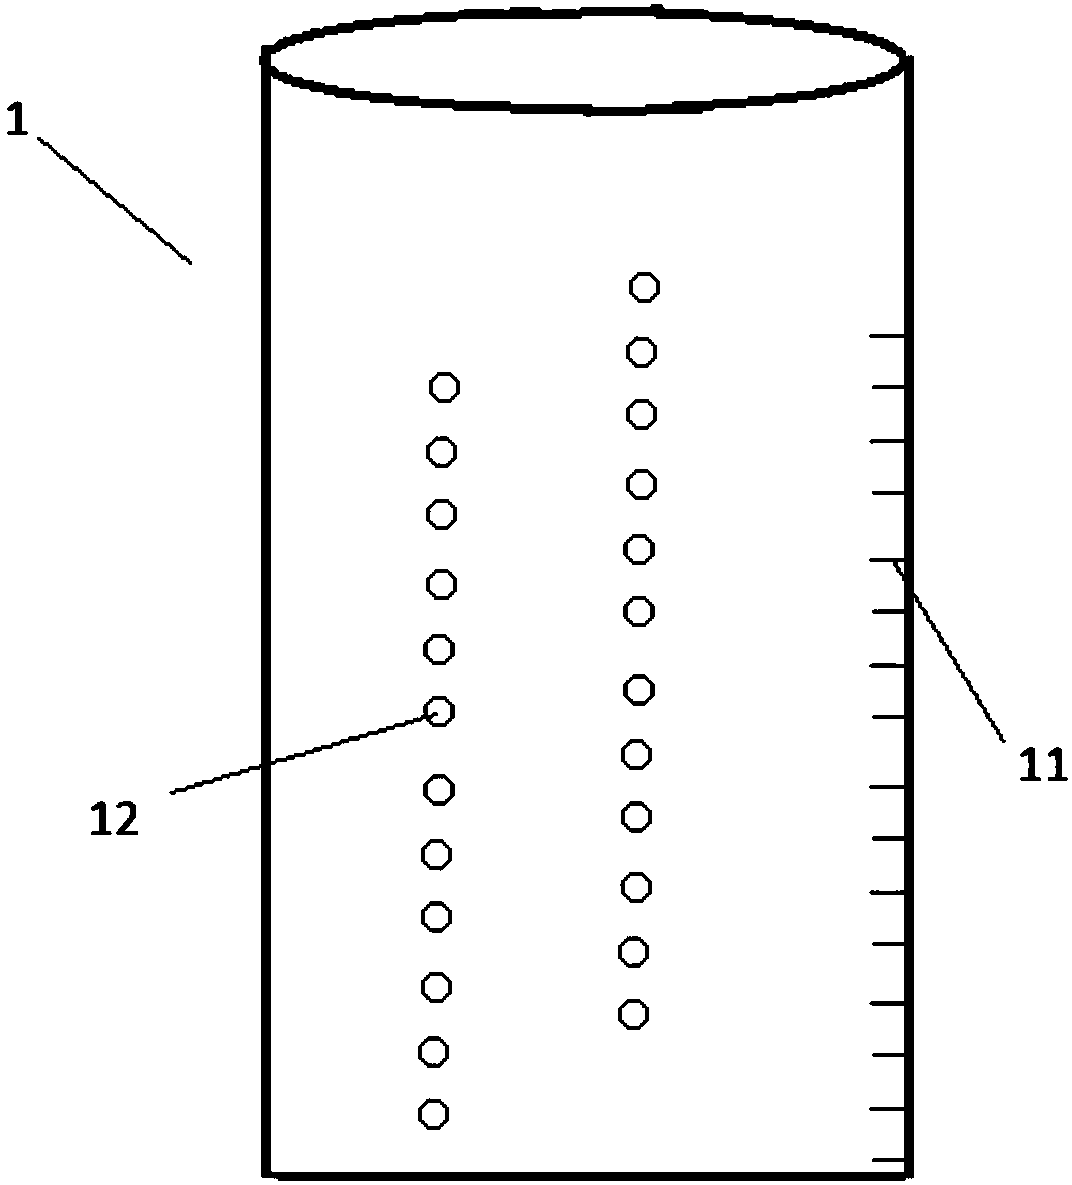 A device for compressing shredded tobacco to a specified bulk density